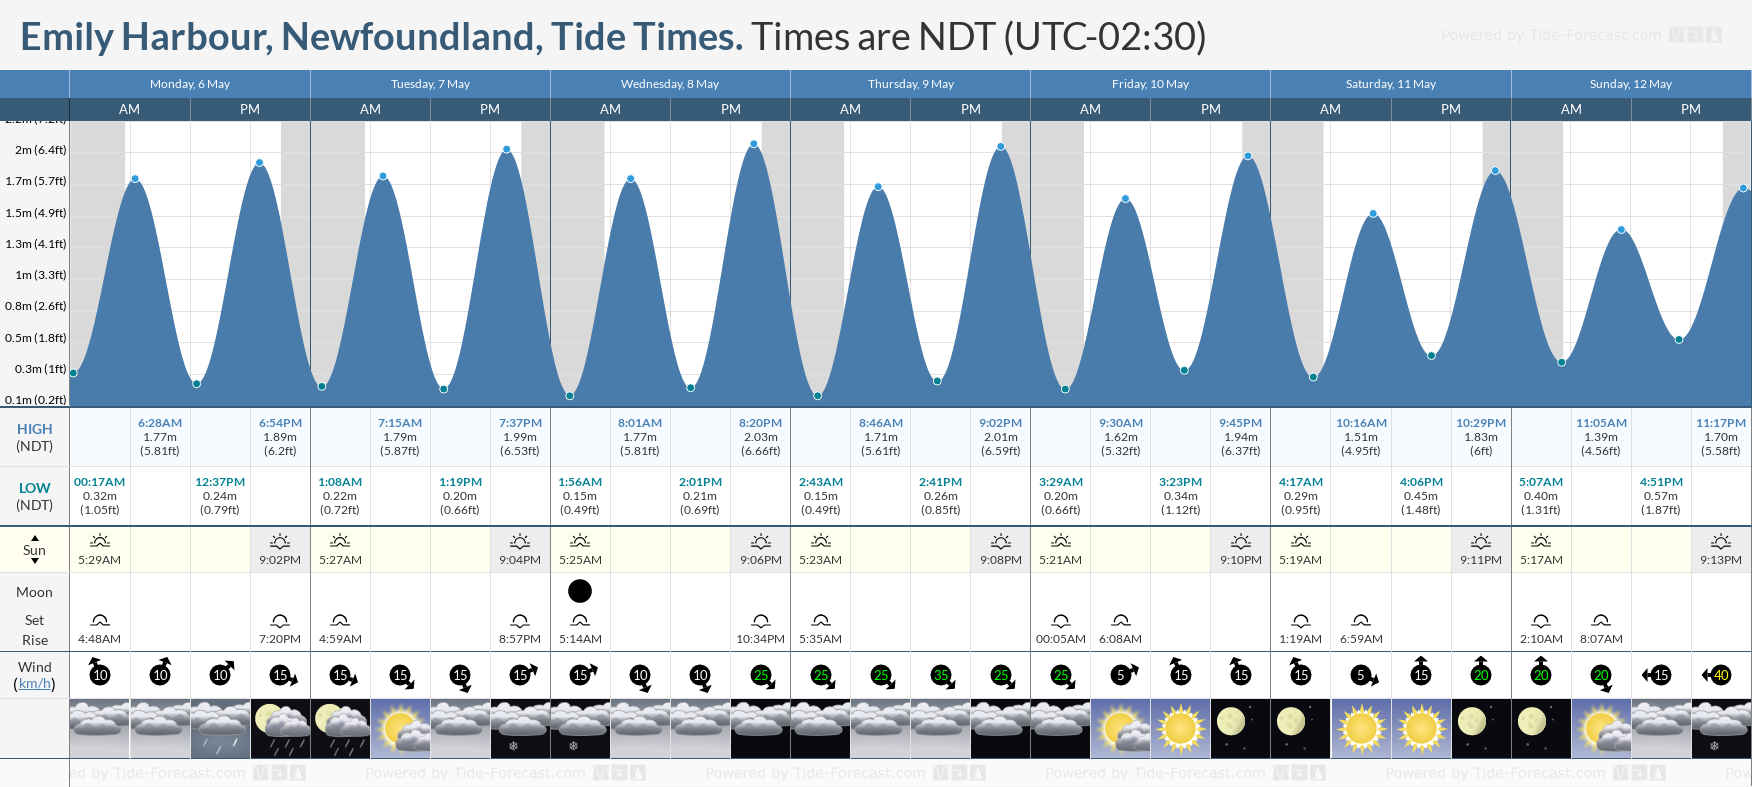 Emily Harbour, Newfoundland Tide Chart including high and low tide tide times for the next 7 days